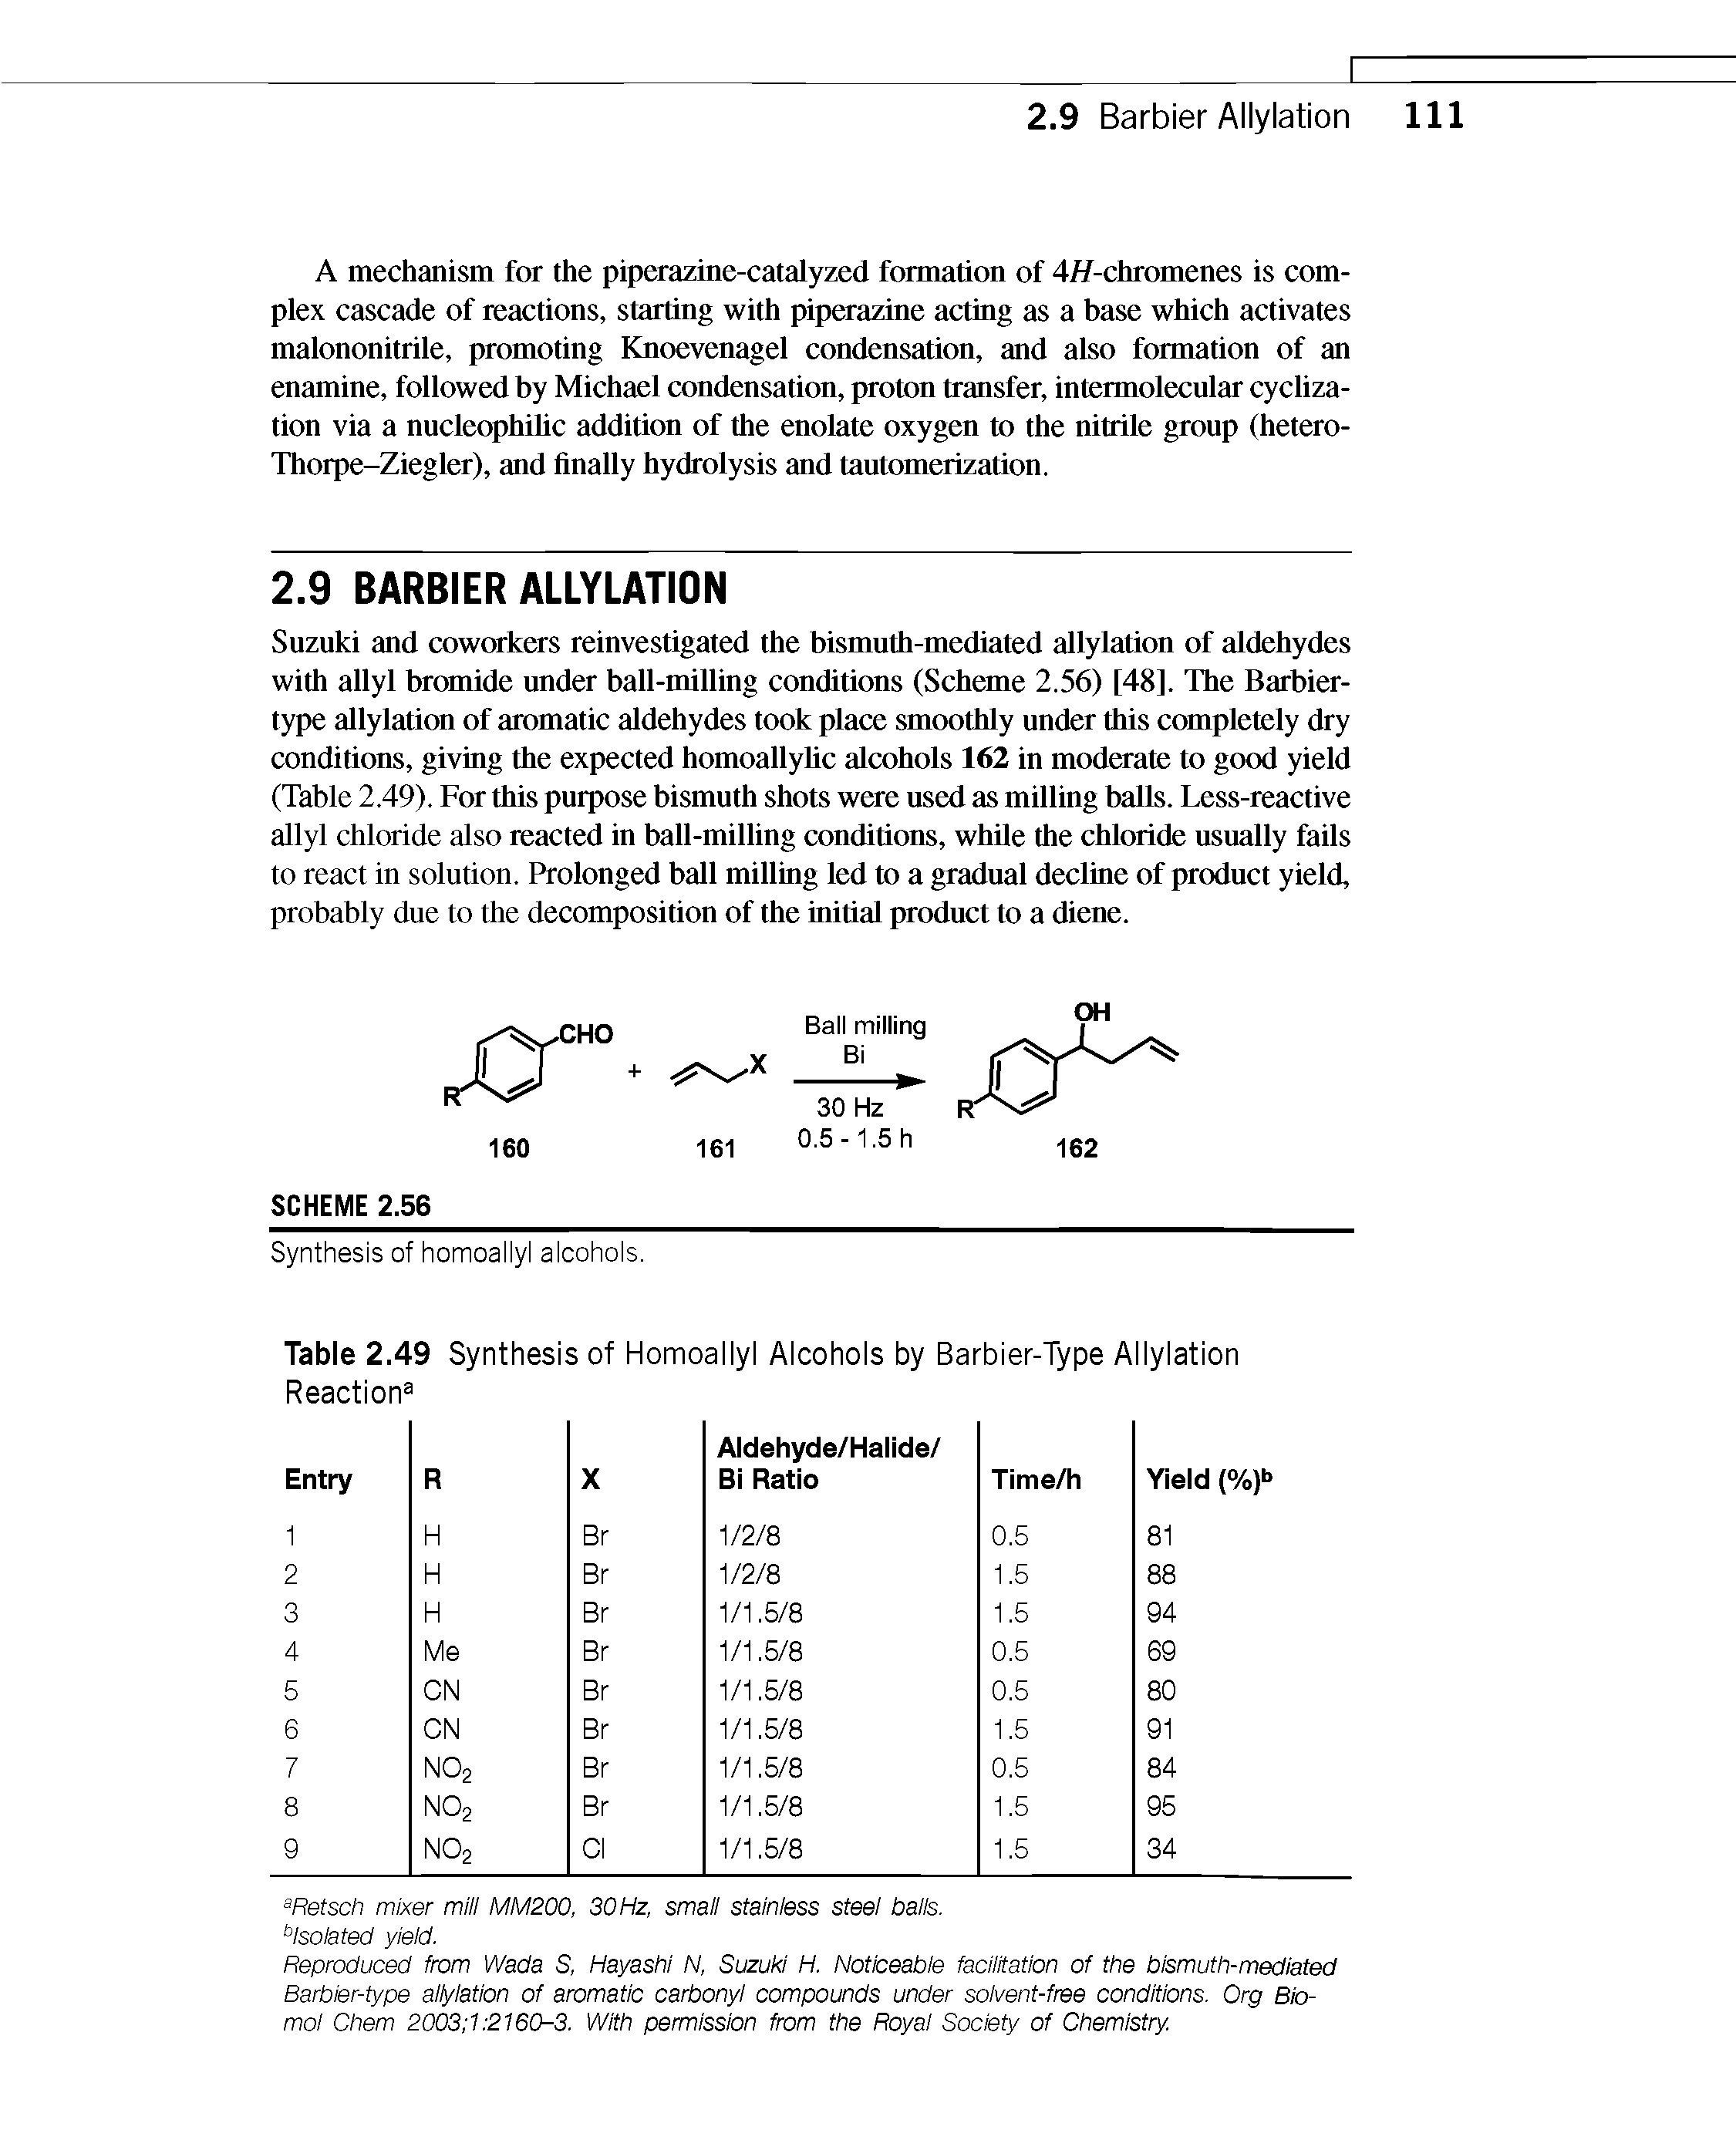 Table 2.49 Synthesis of Homoallyl Alcohols by Barbier-Type Allylation Reaction ...